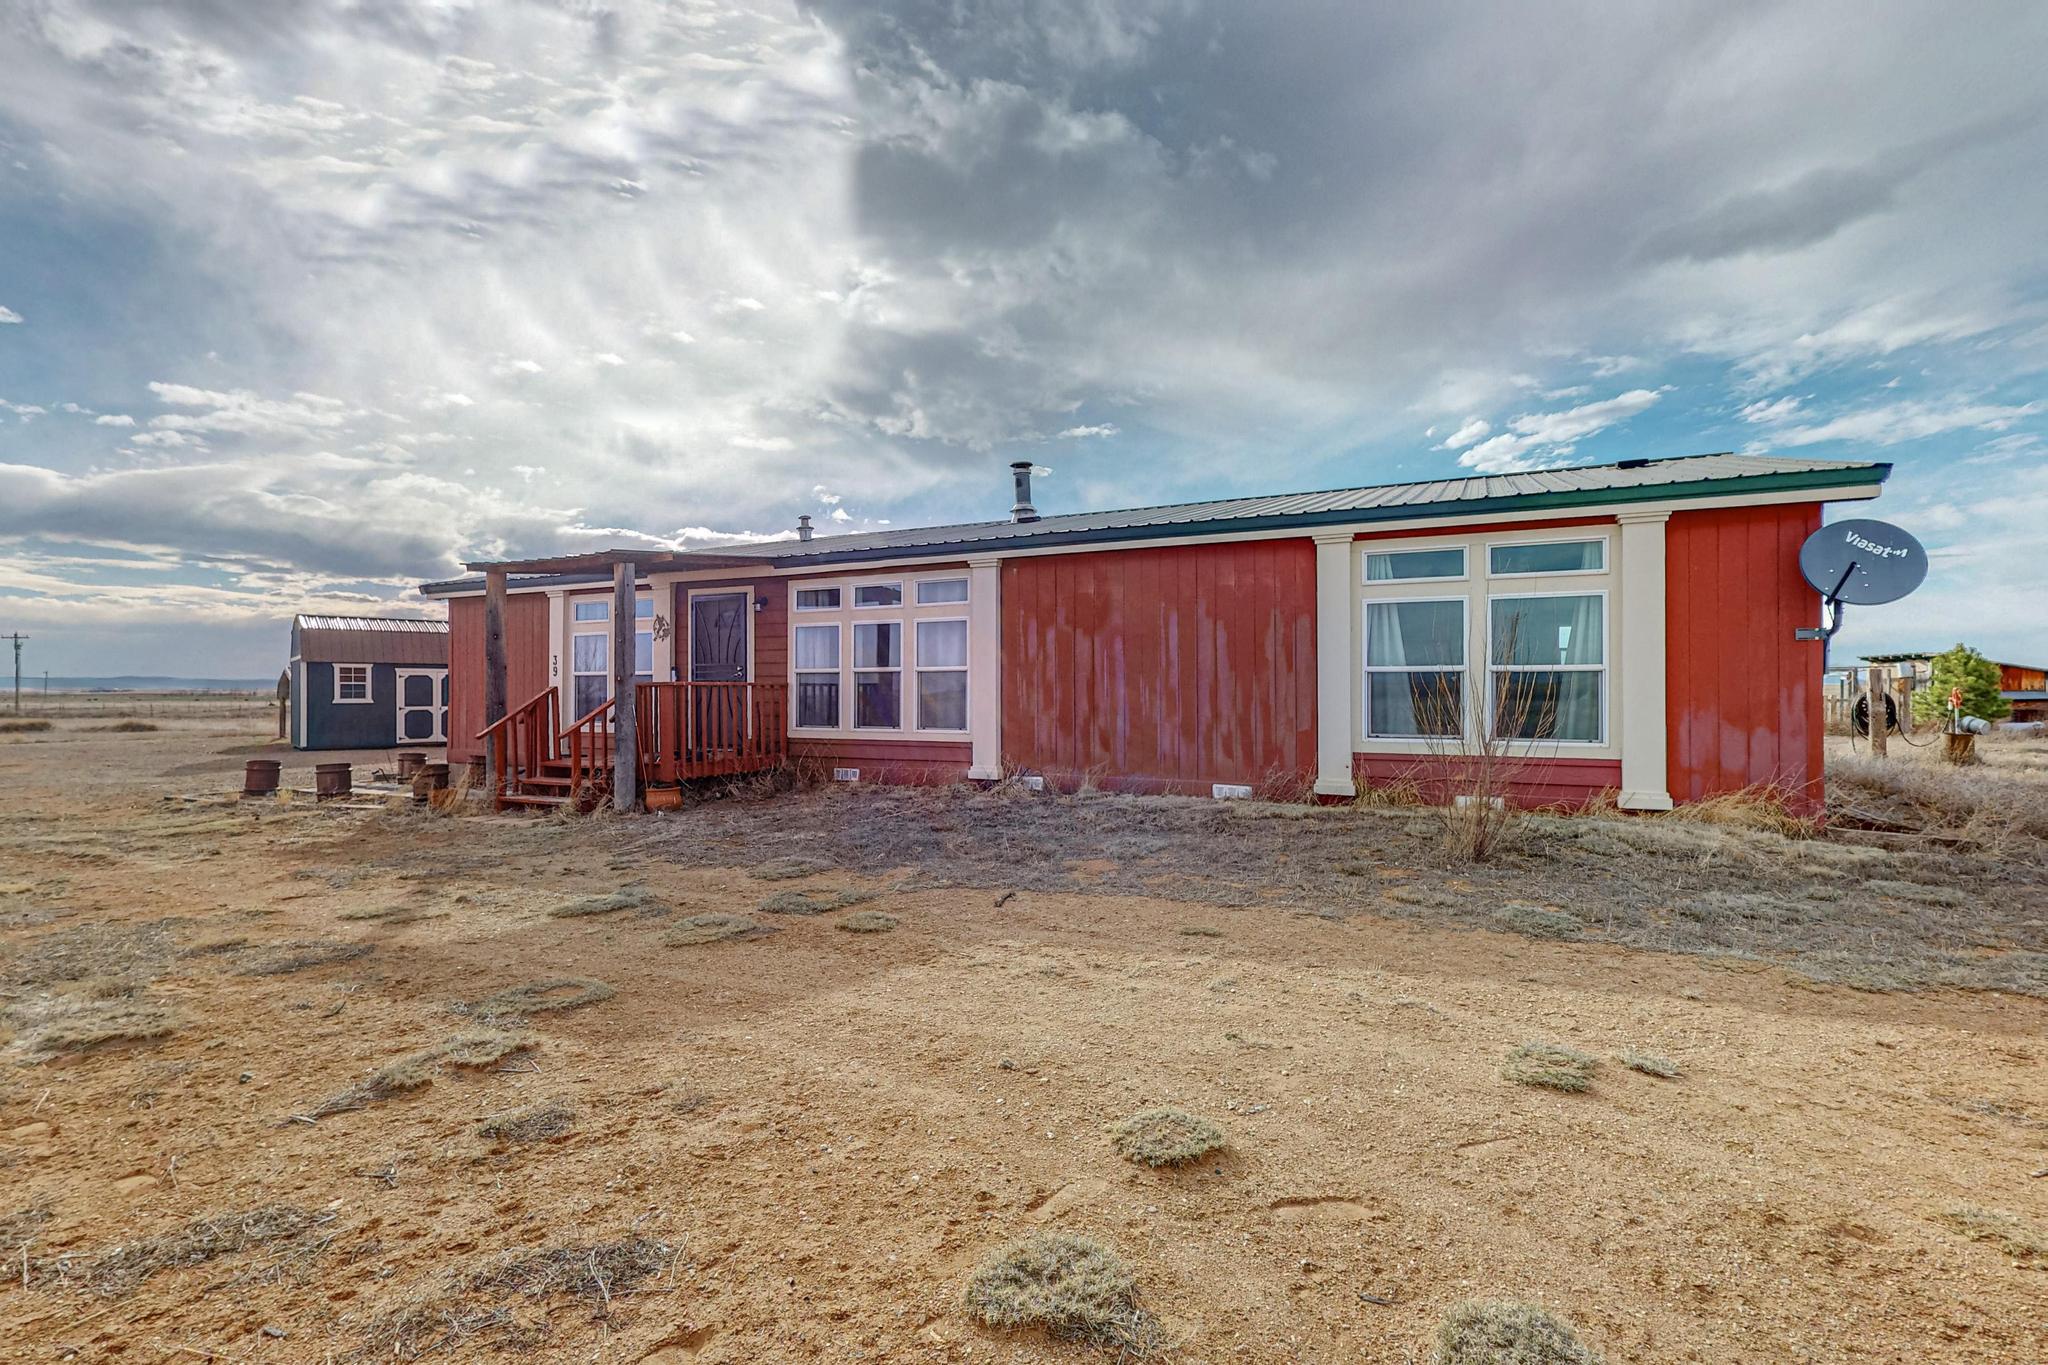 39 Feed Lot Road, Stanley, New Mexico 87056, 3 Bedrooms Bedrooms, ,2 BathroomsBathrooms,Residential,For Sale,39 Feed Lot Road,1059425